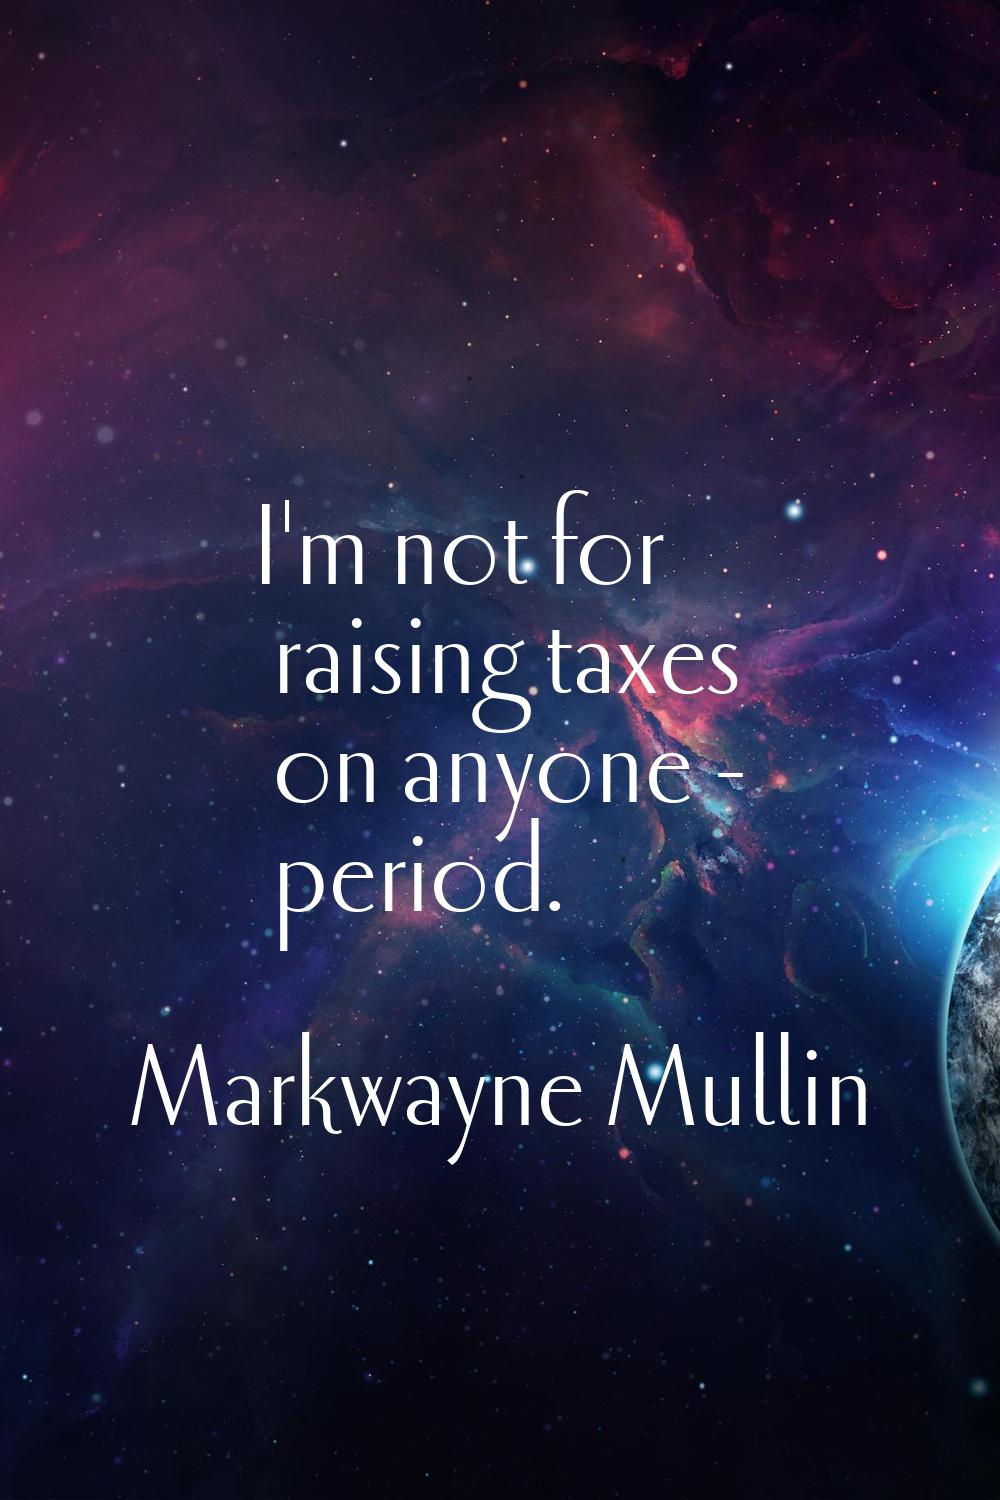 I'm not for raising taxes on anyone - period.